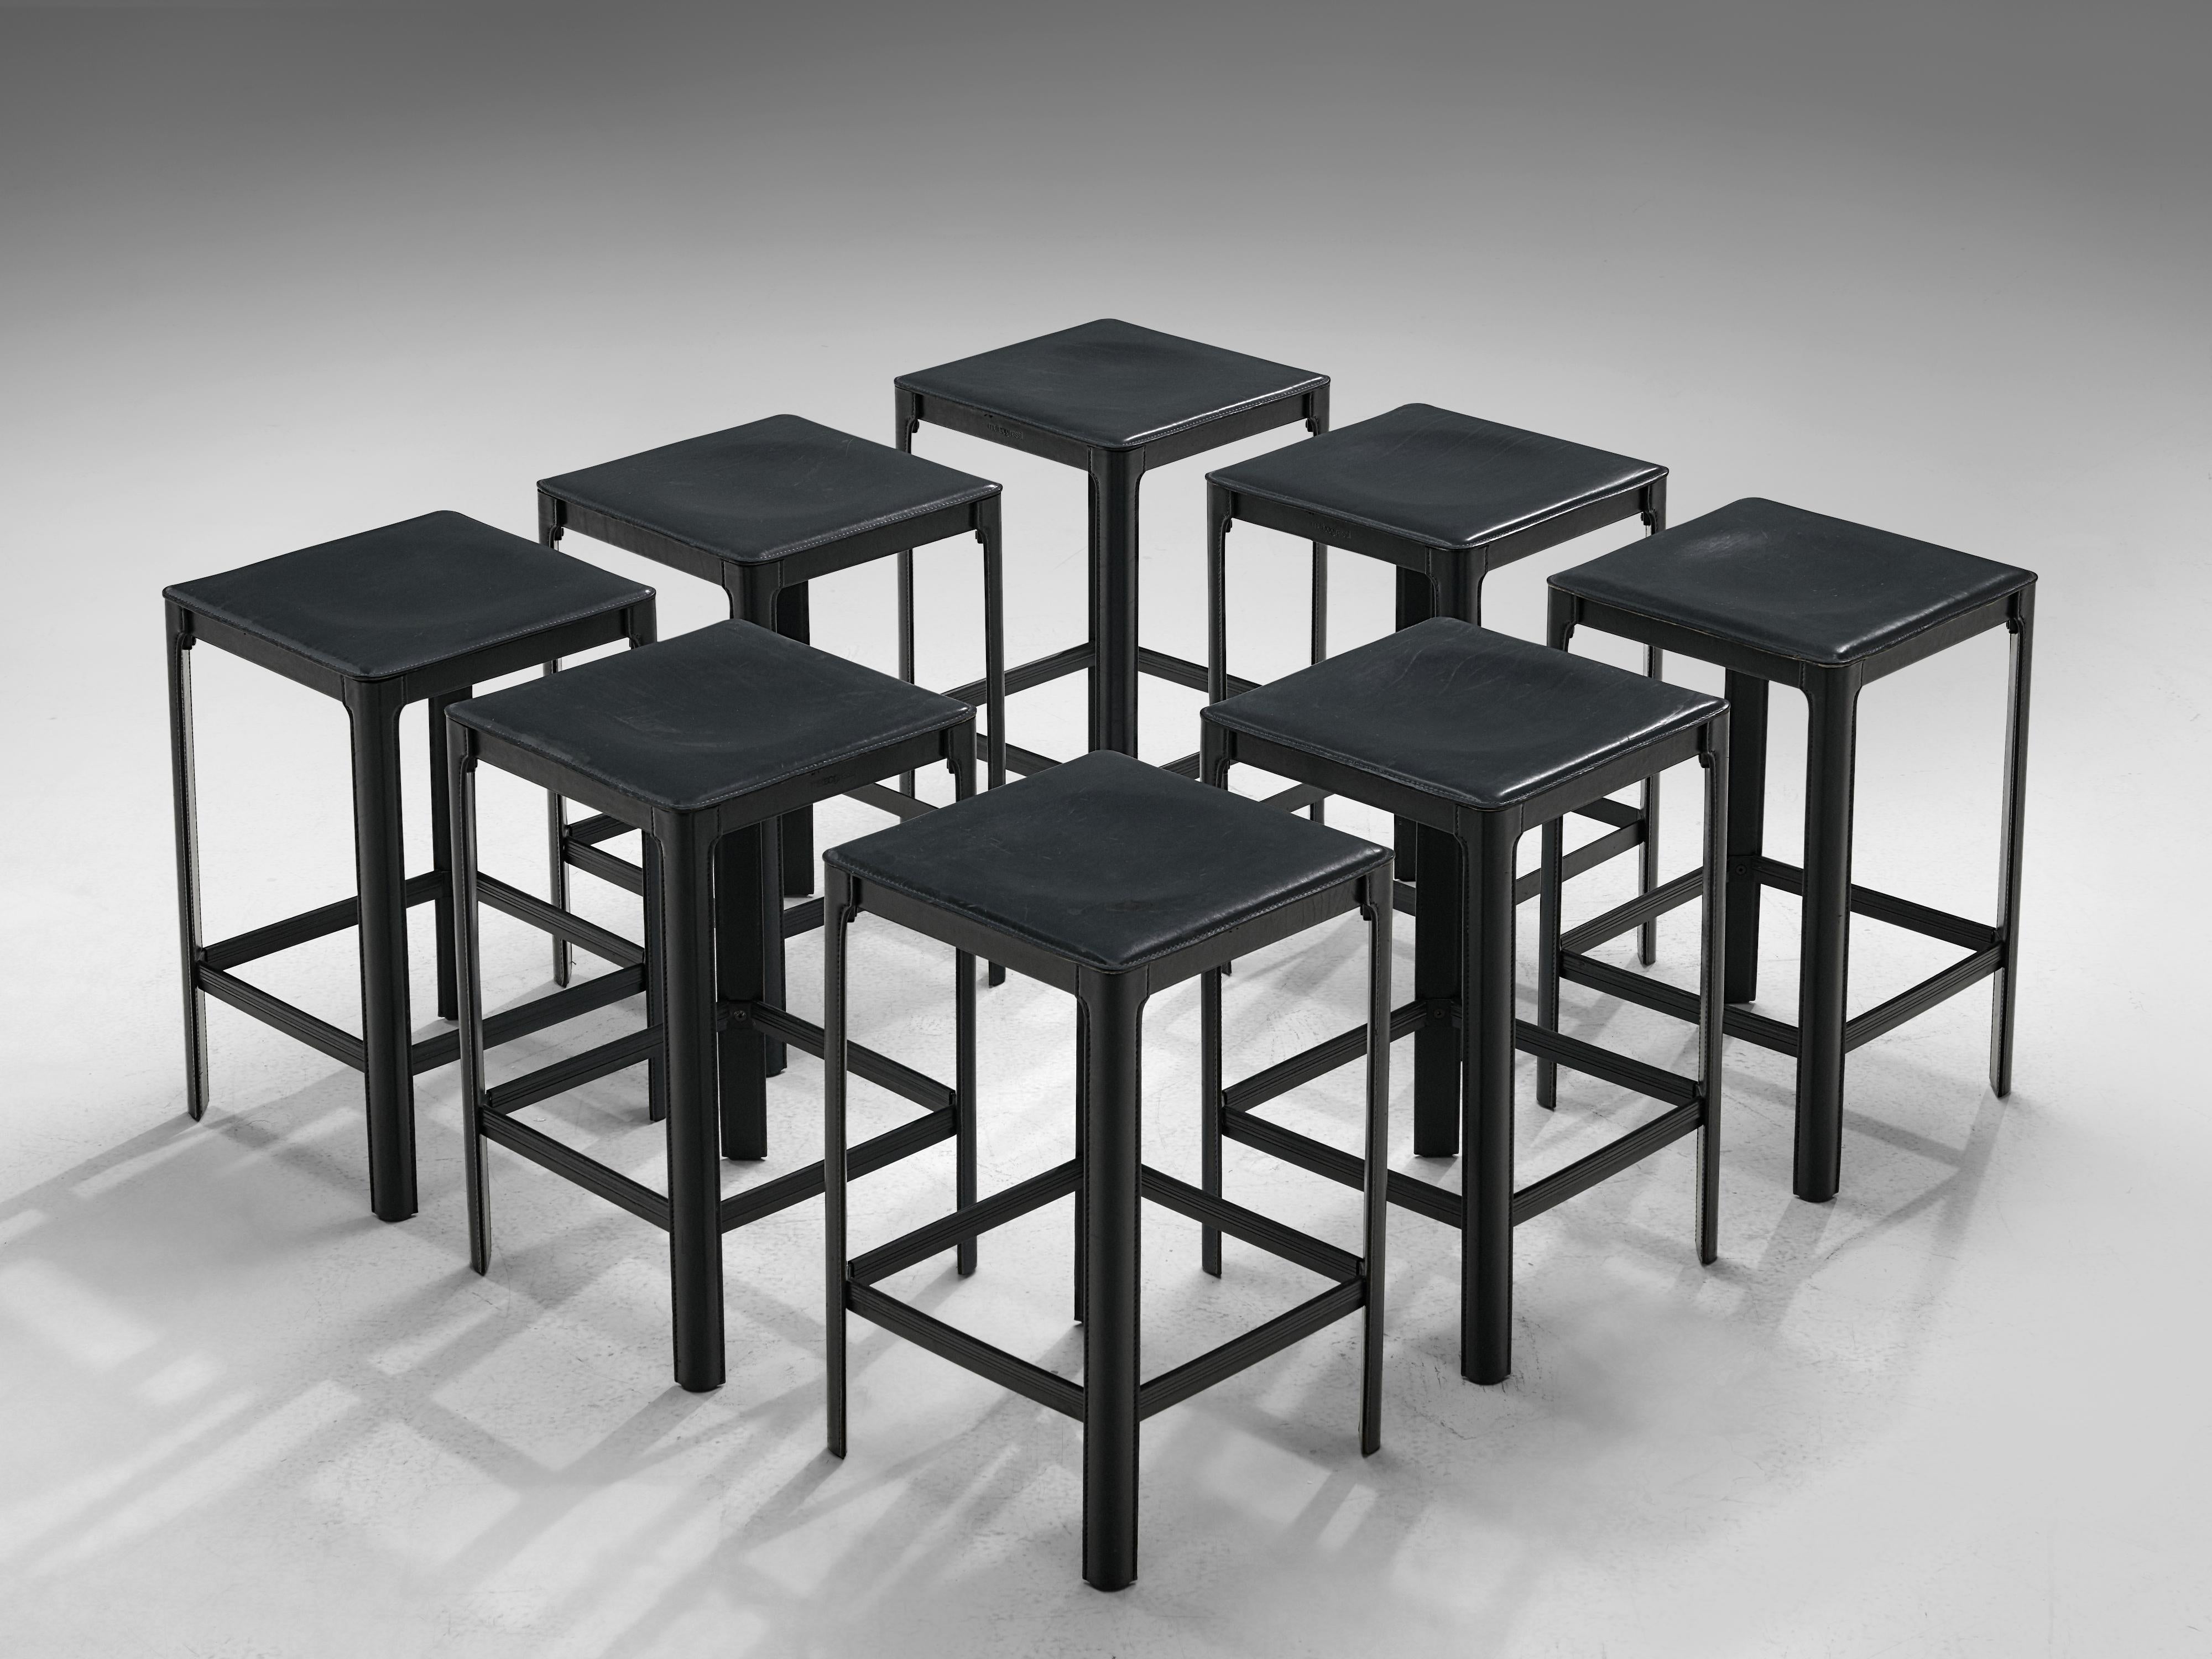 Matteo Grassi, stools, leather, metal, Italy, 1970s

Postmodern set of stools in black leather, designed by Matteo Grassi. The stools are completely covered in leather, which is stitched and molded on to the metal frame, a type of architectural